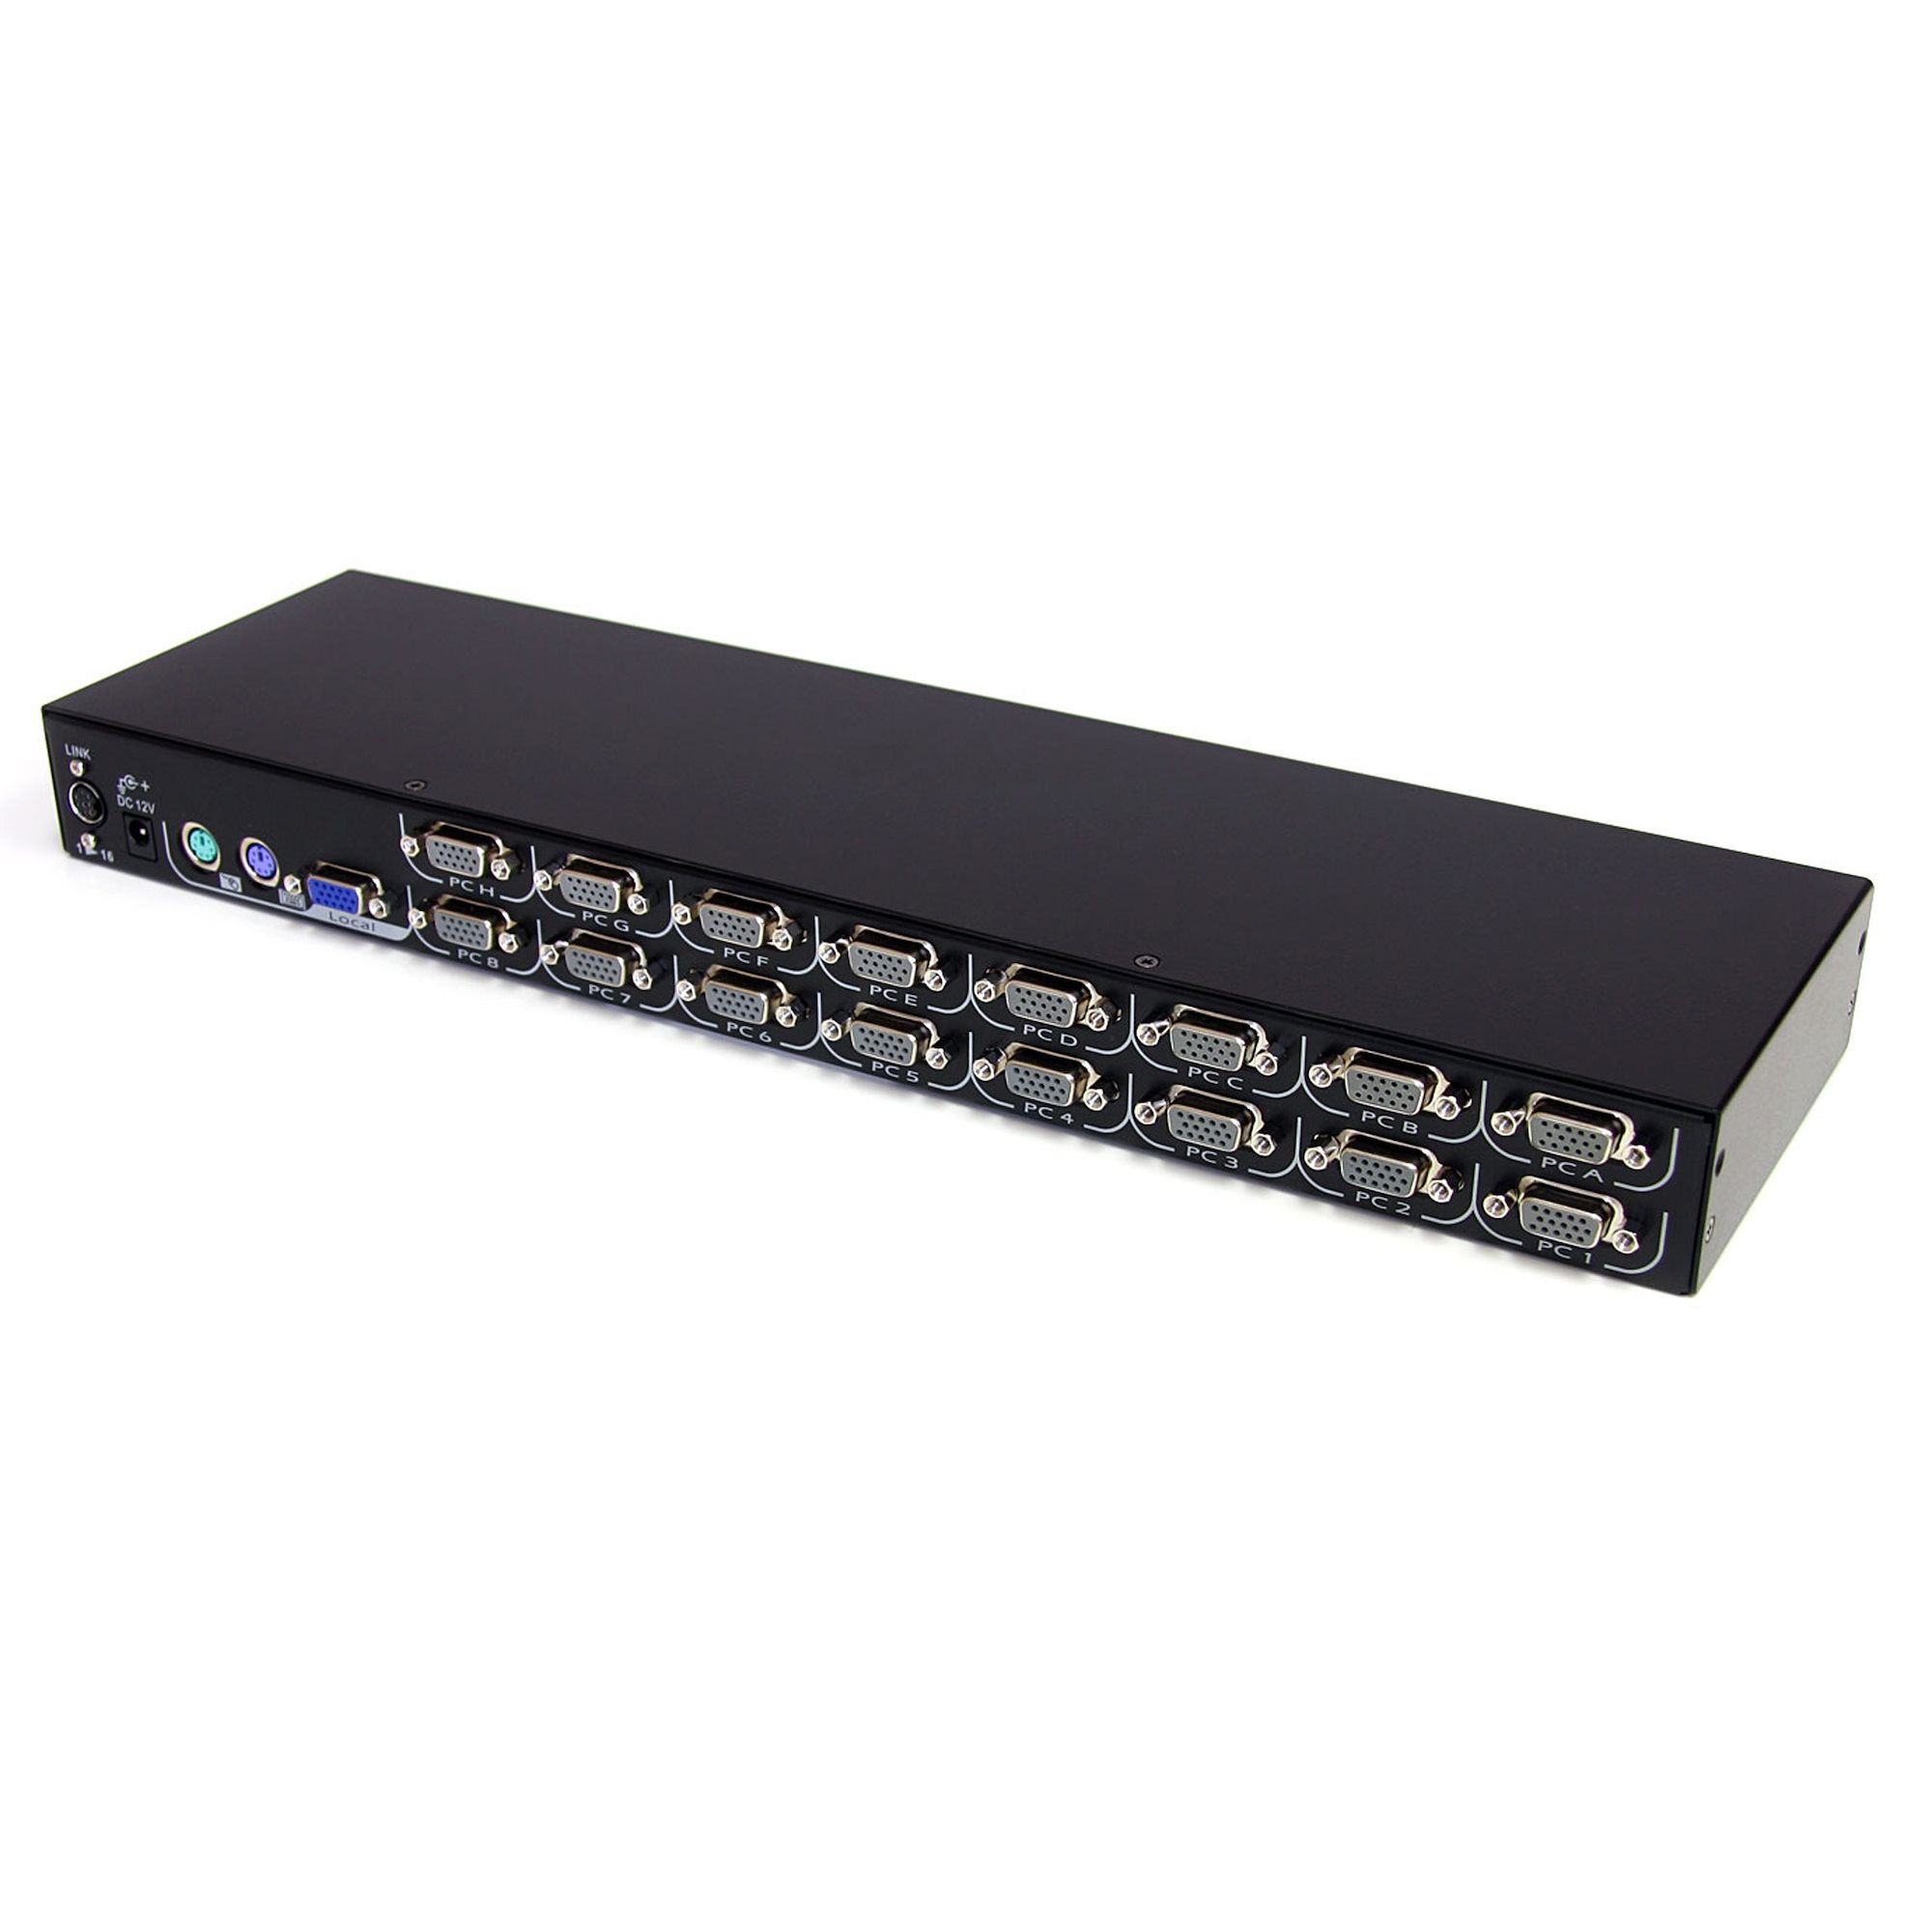 16-Port x2 Users Cat5e/6 1U Rack-Mount USB KVM Switch with 17 Full HD  1080P LCD and IP Remote Access, 16 Interface Modules Included 